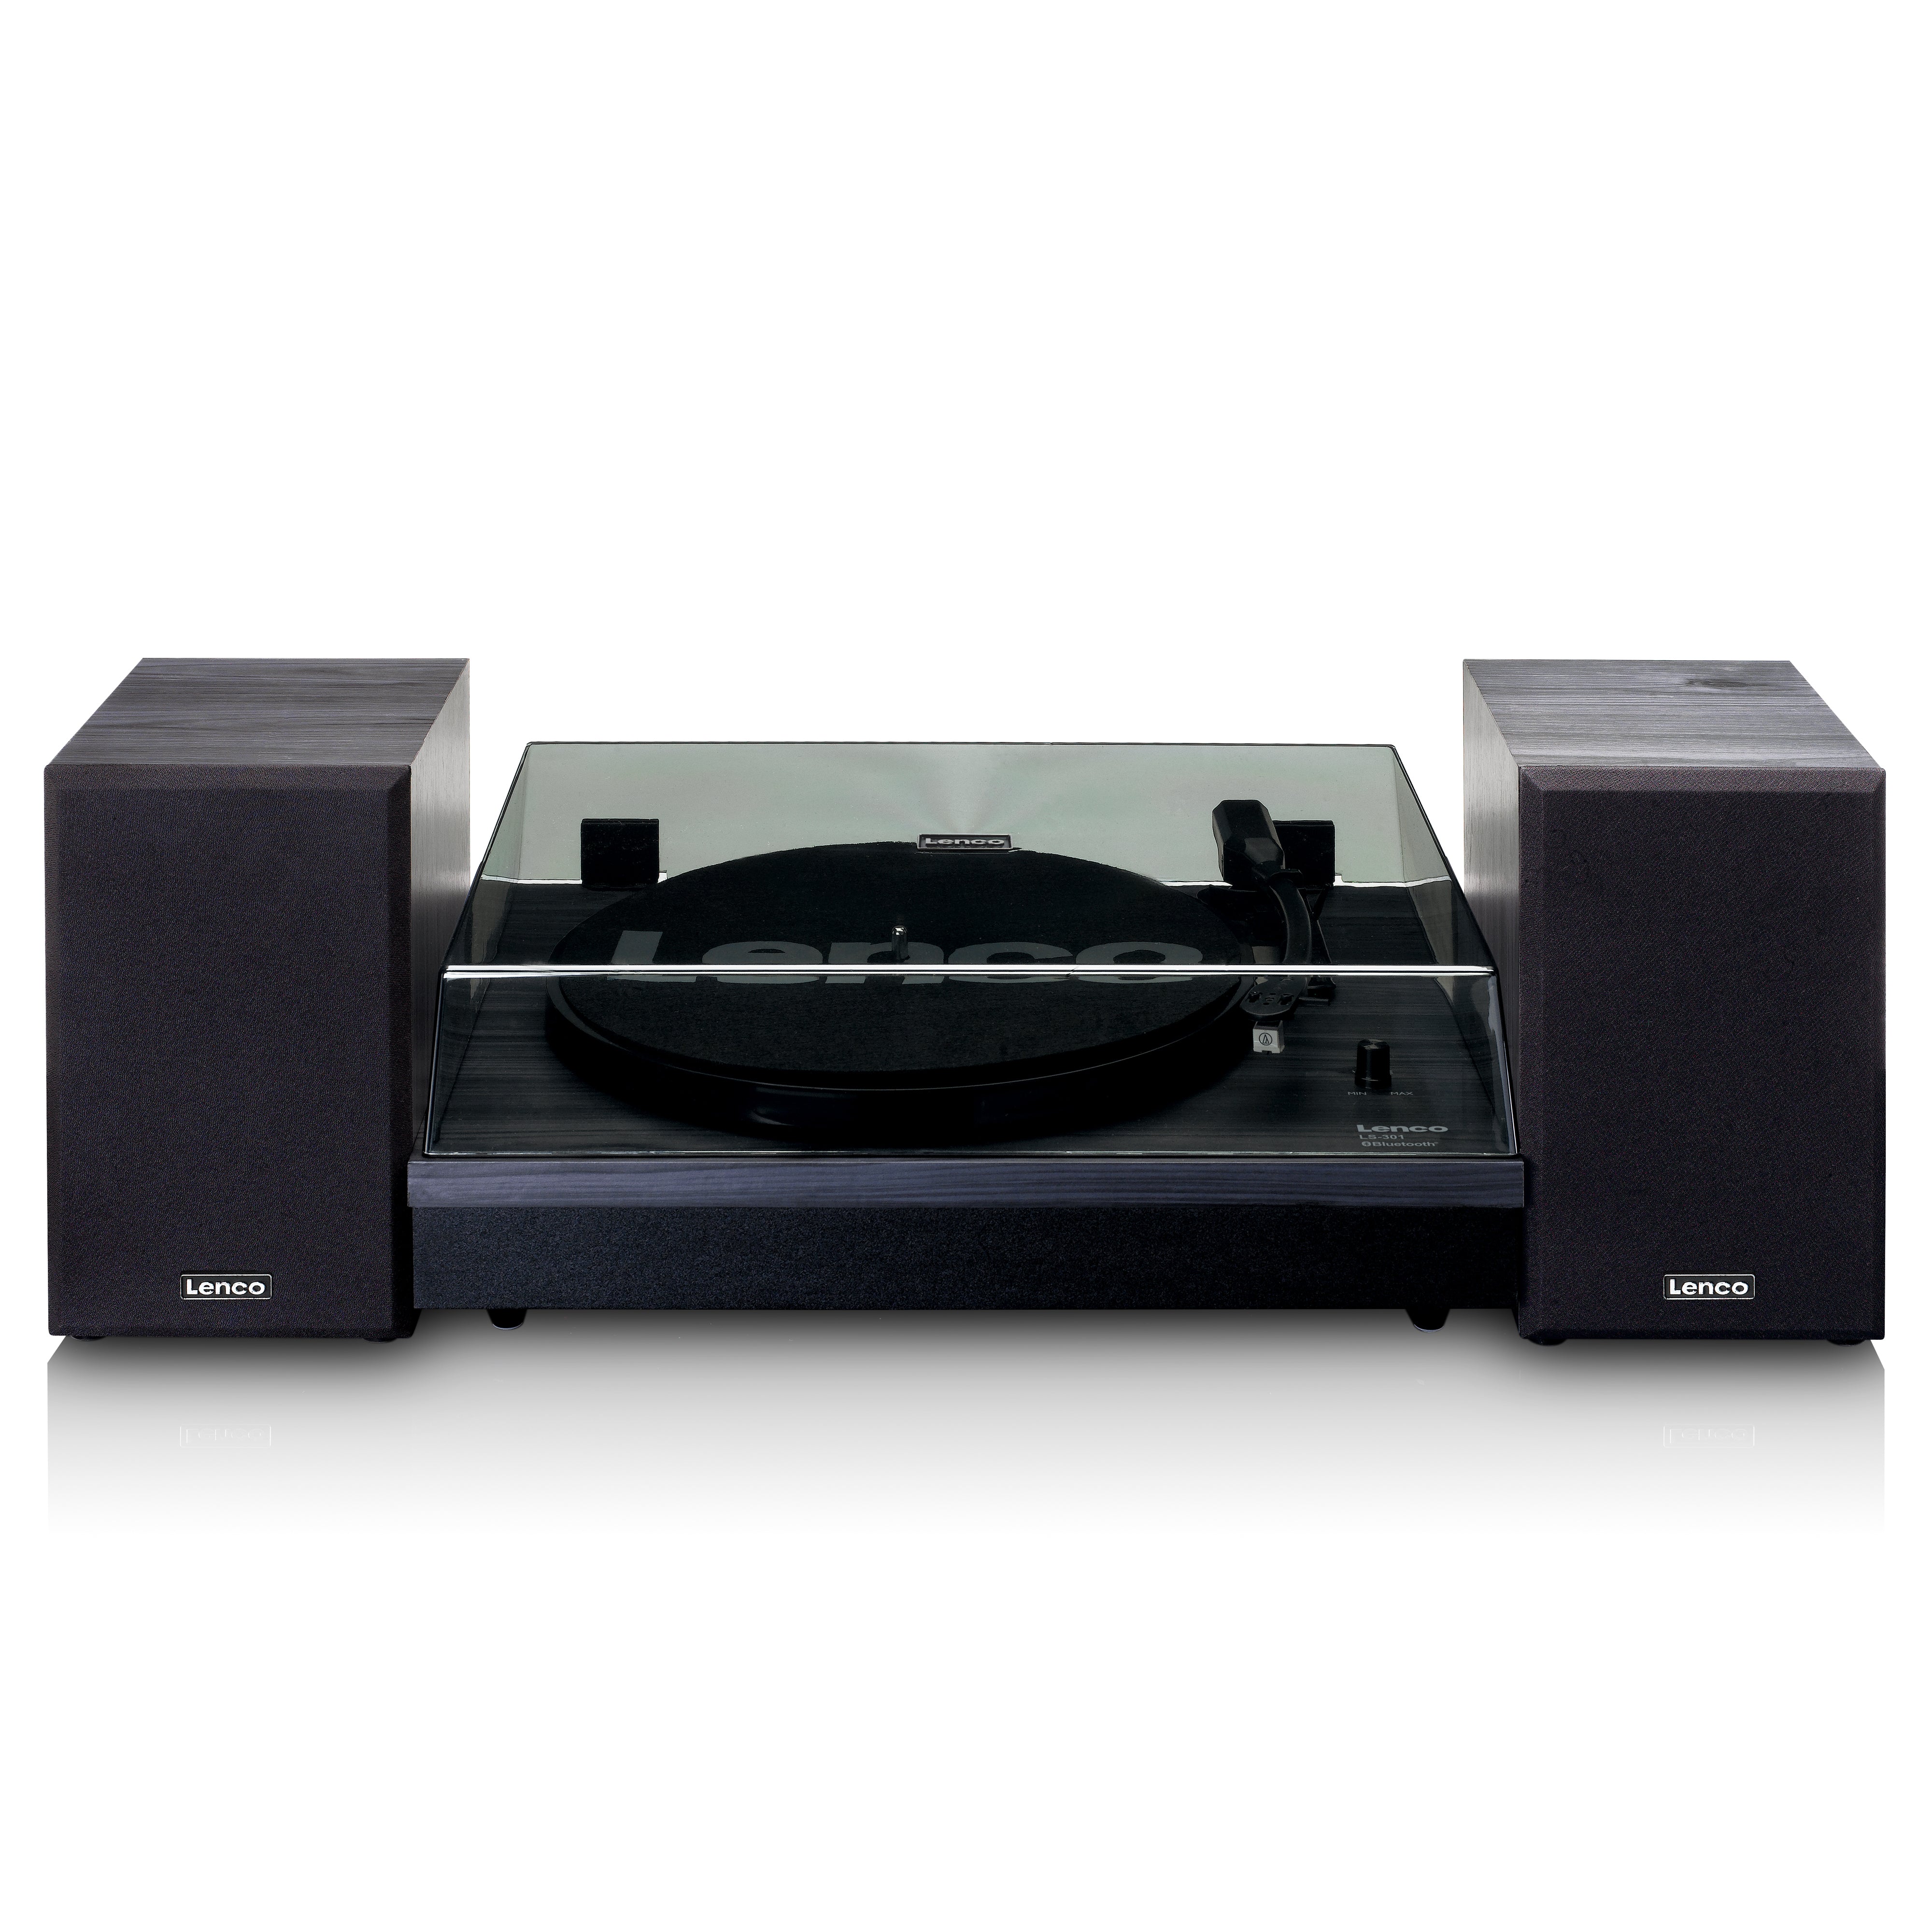 Lenco LS-301BK - Turntable with Bluetooth Connectivity and Speakers, Black